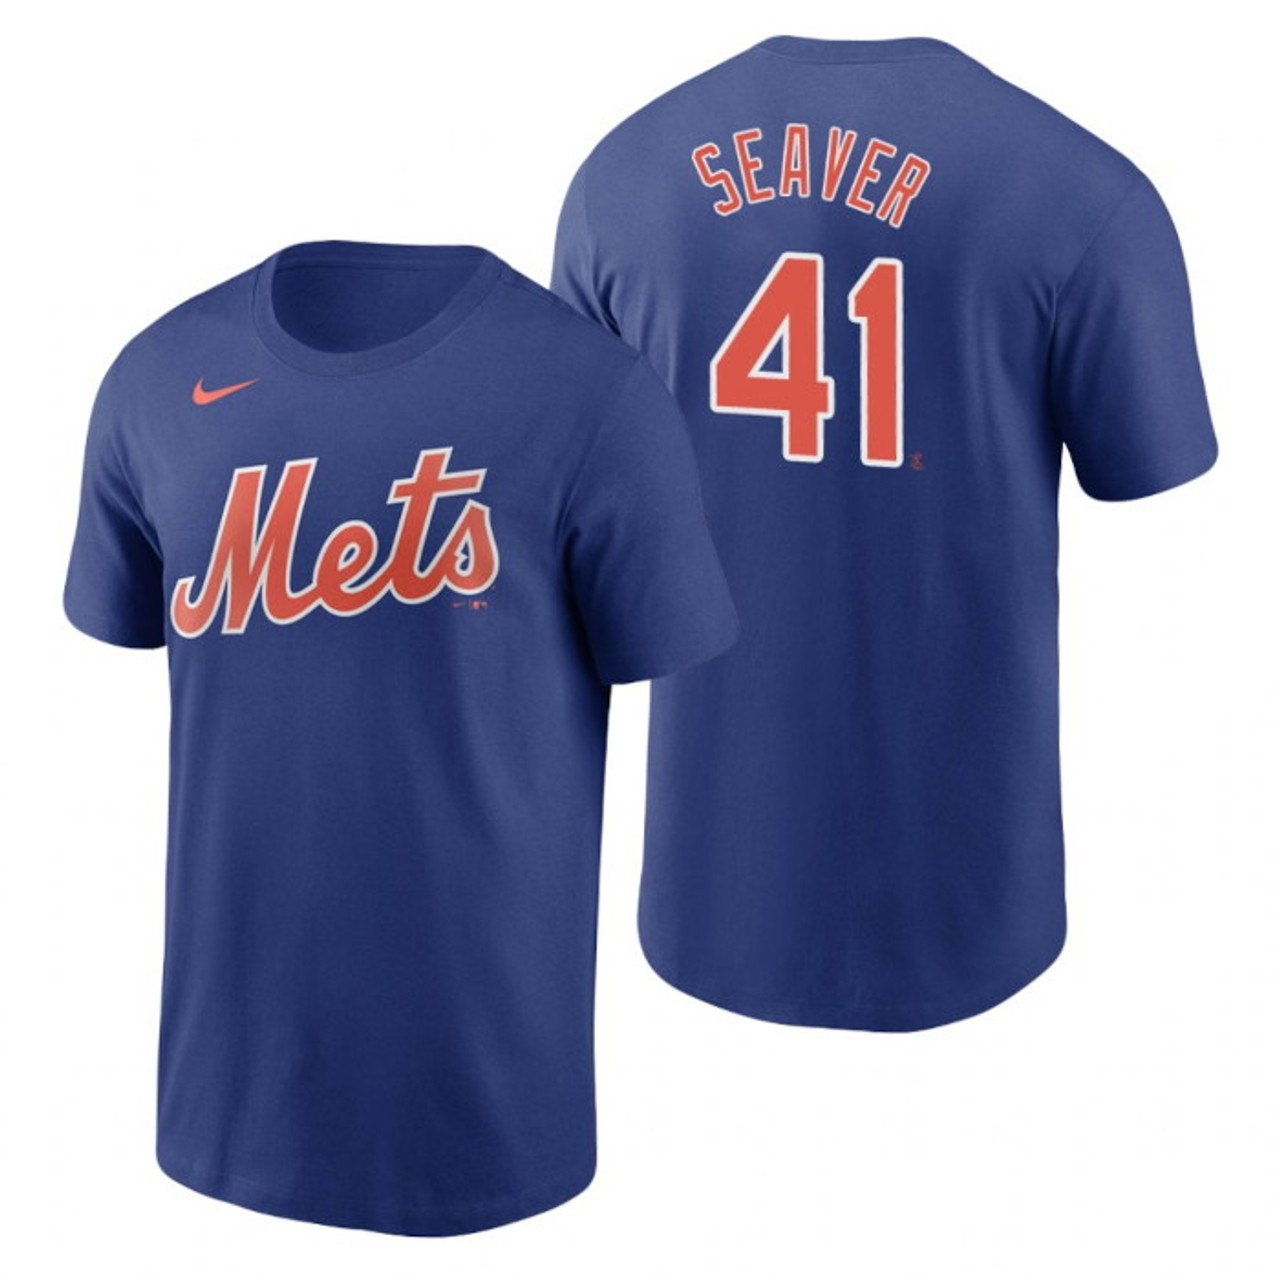 Nike Men's Nike Tom Seaver Royal New York Mets Cooperstown Collection Name  & Number T-Shirt